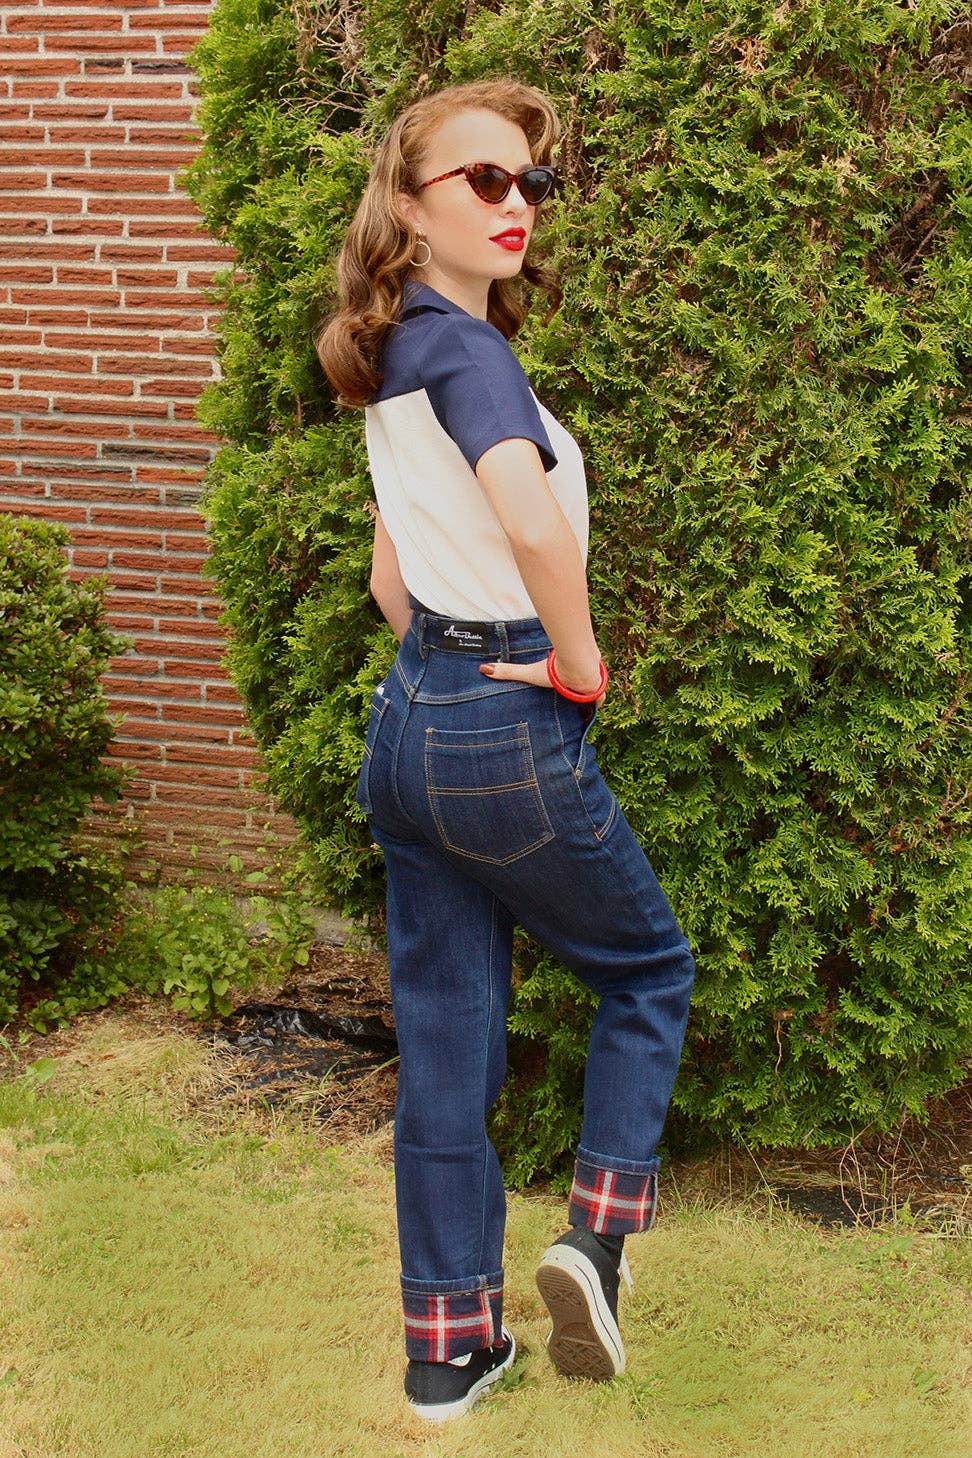 Astro Bettie - 1940s Reproduction Flannel Lined Jeans - Red/Blue